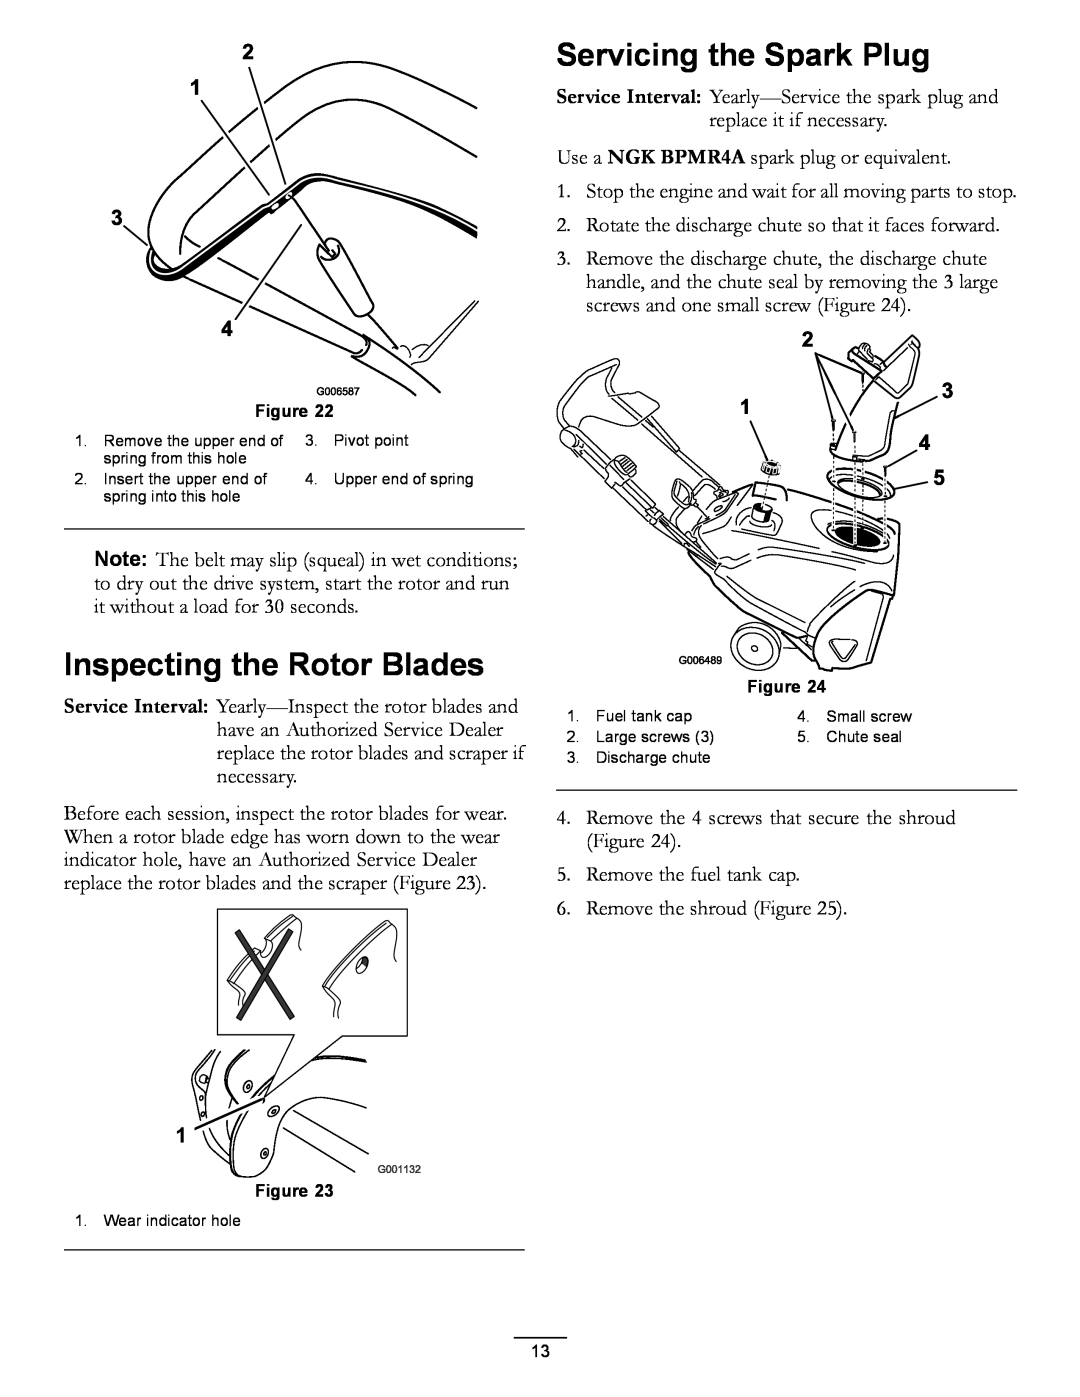 Toro 38583, 38584 owner manual Servicing the Spark Plug, Inspecting the Rotor Blades 